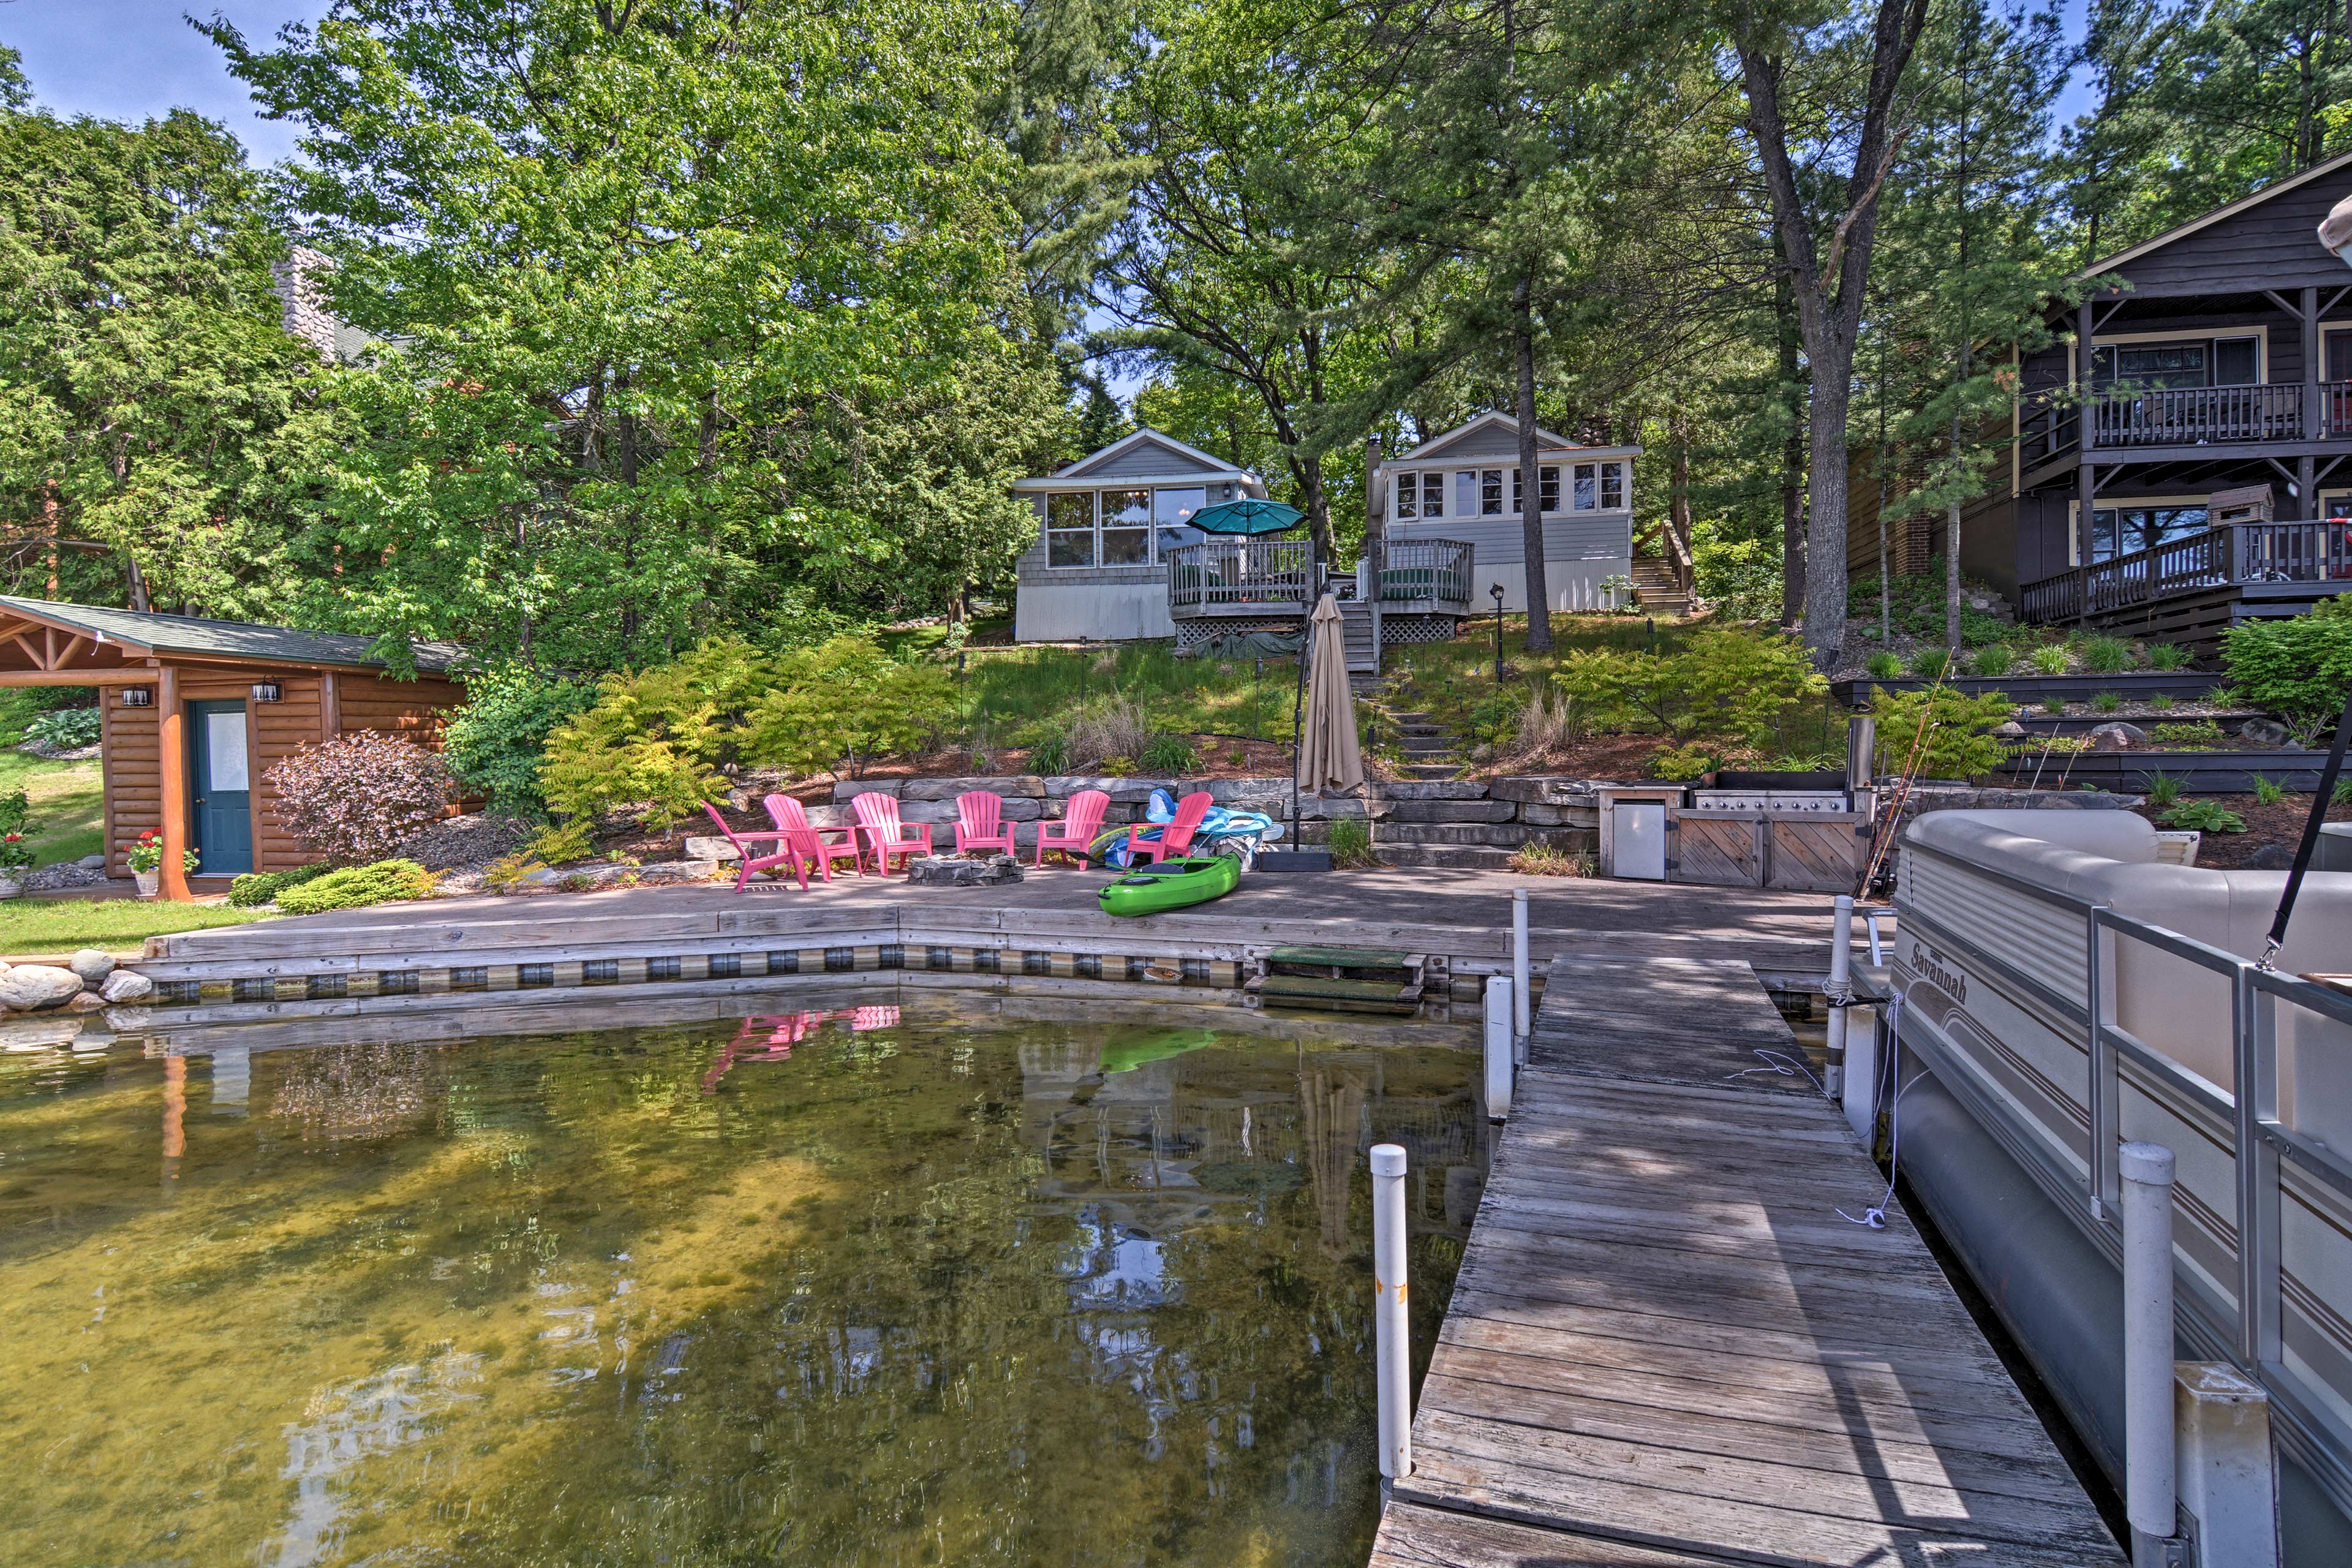 Kayak, swim, boat, or fish off the side of the large private dock!